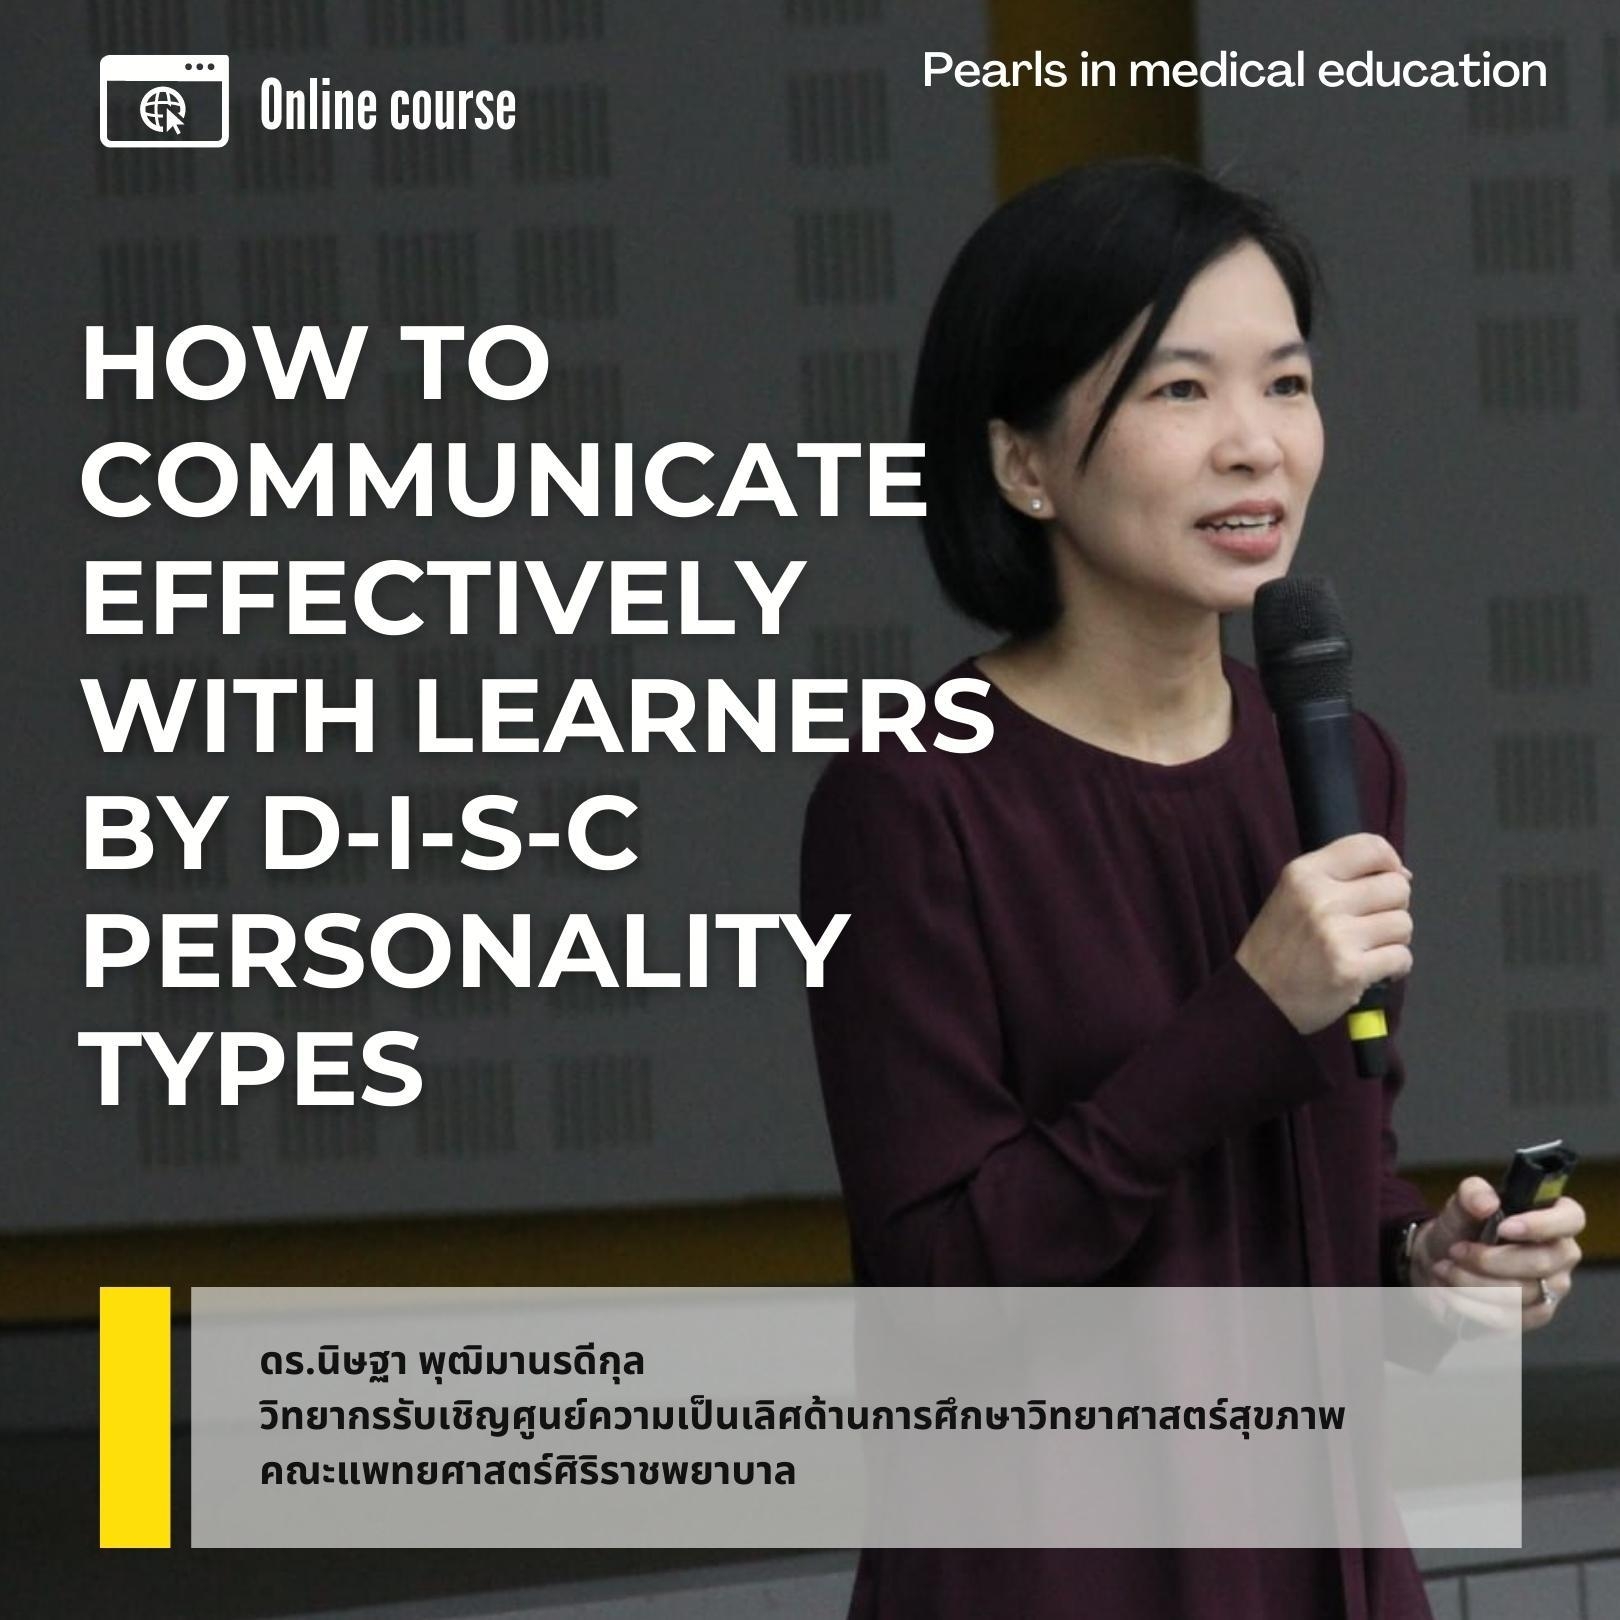 How to communicate effectively with learners by D-I-S-C